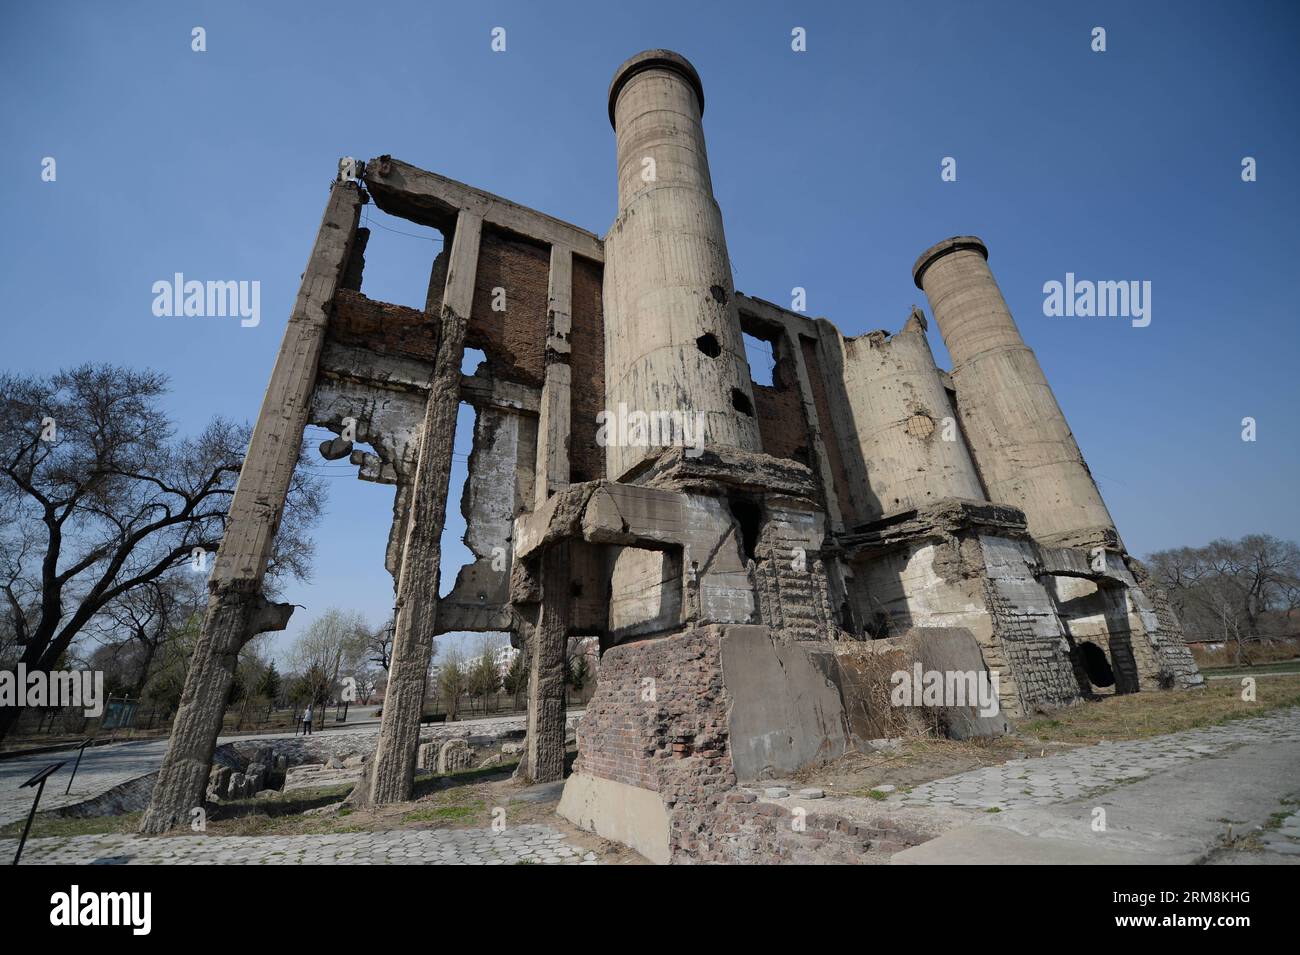 (140418) -- HARBIN, April 18, 2014 (Xinhua) -- Photo taken on April 18, 2014 shows the ruins of a Unit 731 boiler building in Harbin, capital of northeast China s Heilongjiang Province. Unit 731 was a Harbin-based biological and chemical warfare research unit of the Japanese army during WWII. The Unit 731 facility ruins in Harbin are evidences of the wartime atrocities committed by Japanese invaders in China. Unit 731 members conducted a series of human experiments which subjected victims to vivisections, germ war attacks, weapon tests and other forms of torture. April 18 is the International Stock Photo